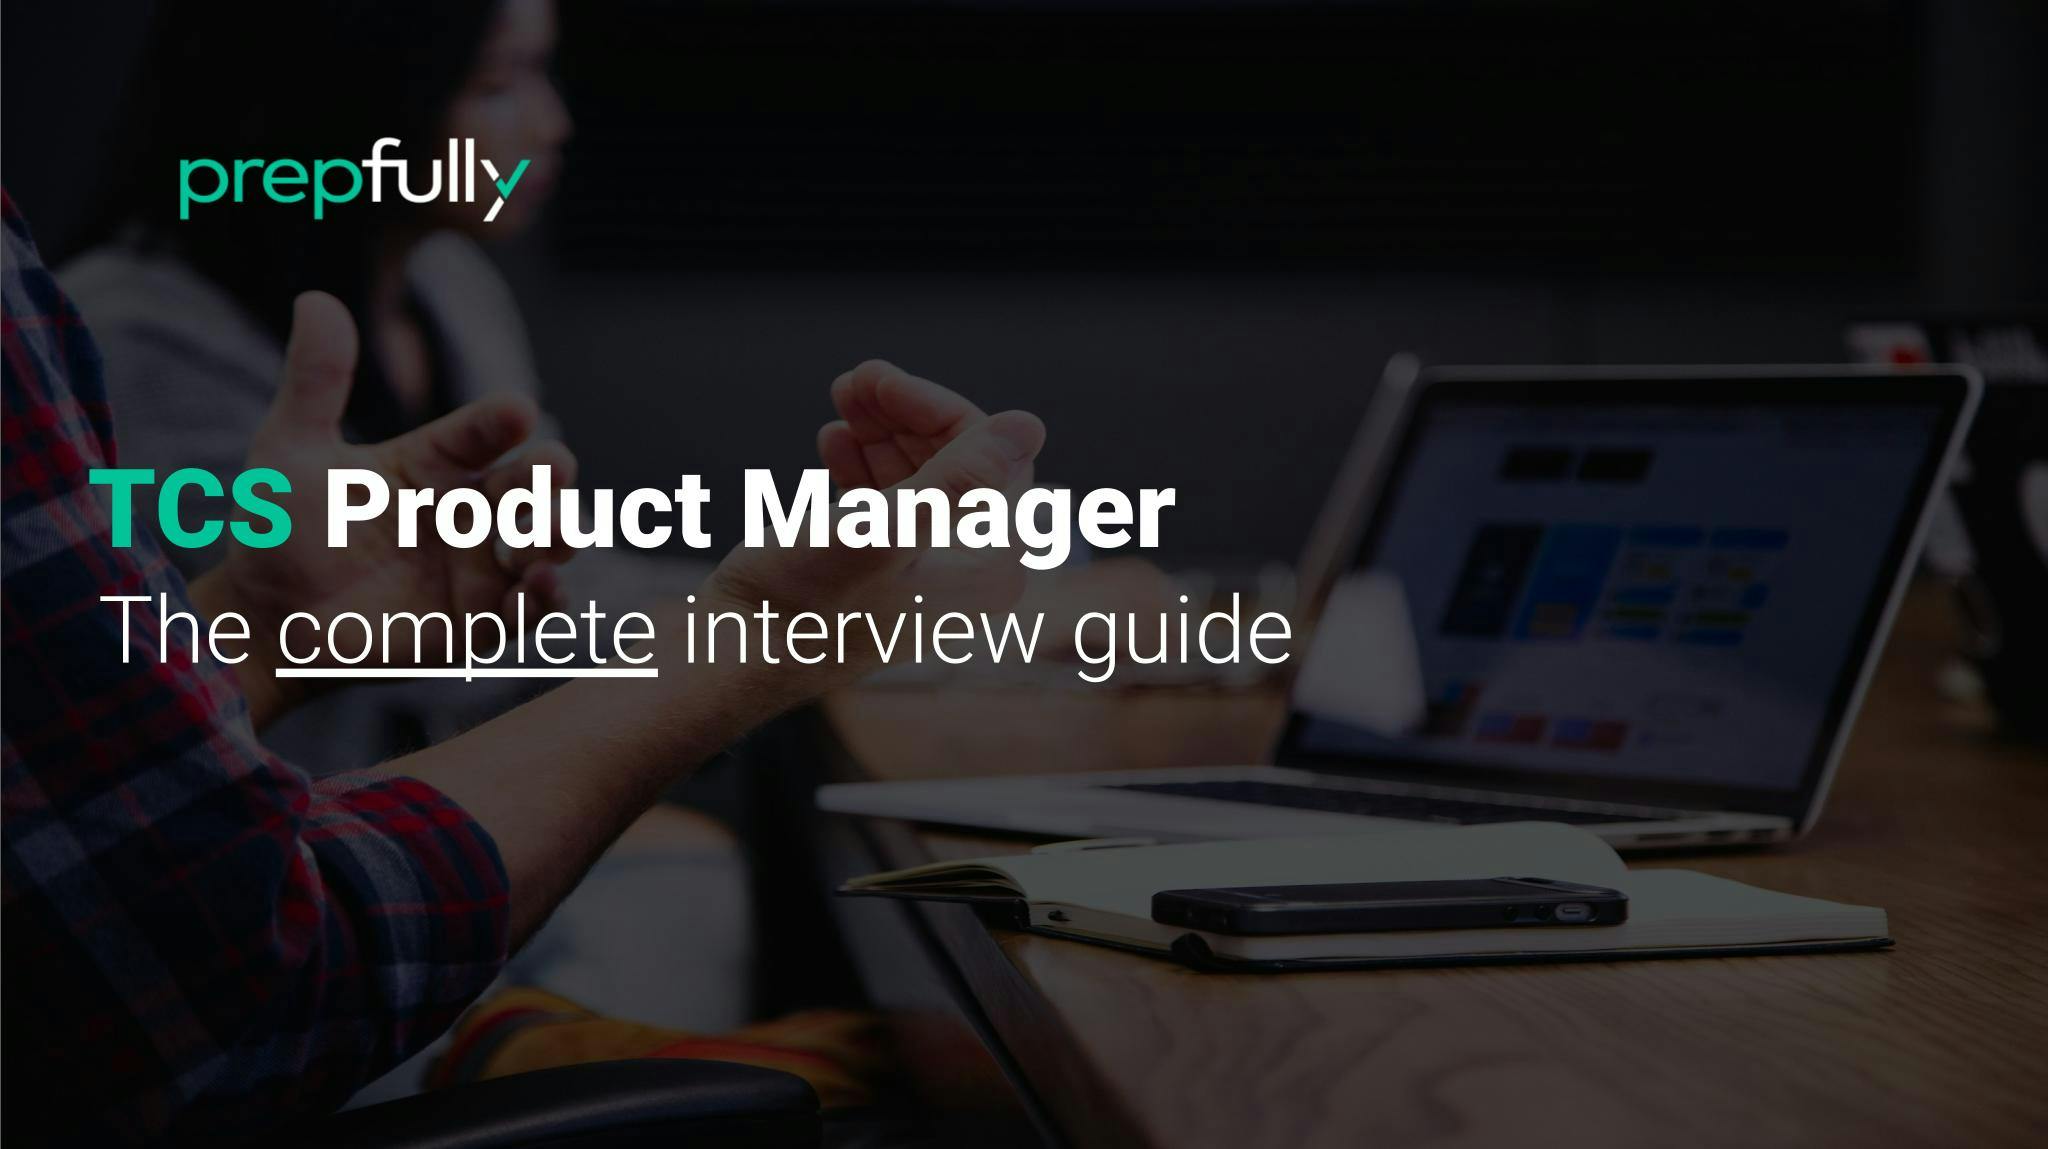 Interview guide for TCS Product Manager